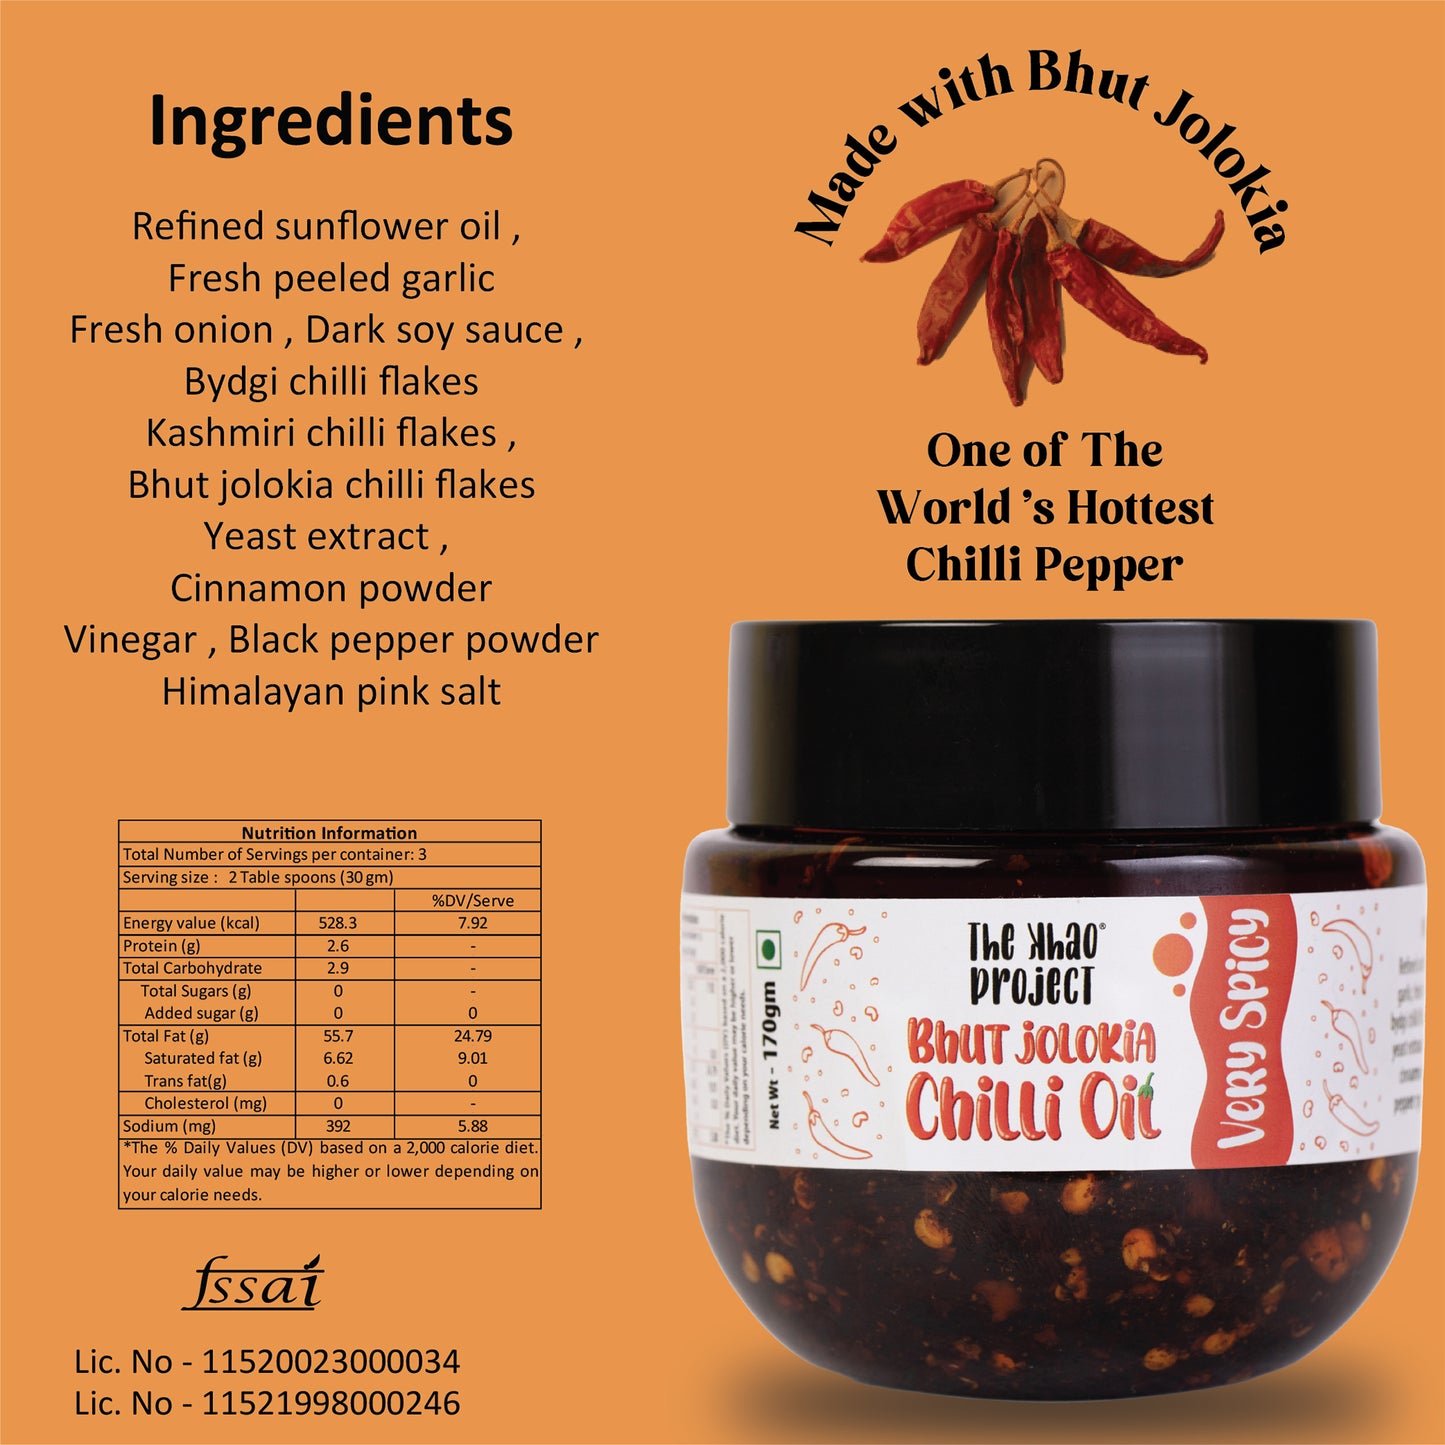 The Khao Project Bhut Jolokia Crunchy Chilli Oil- Very Spicy